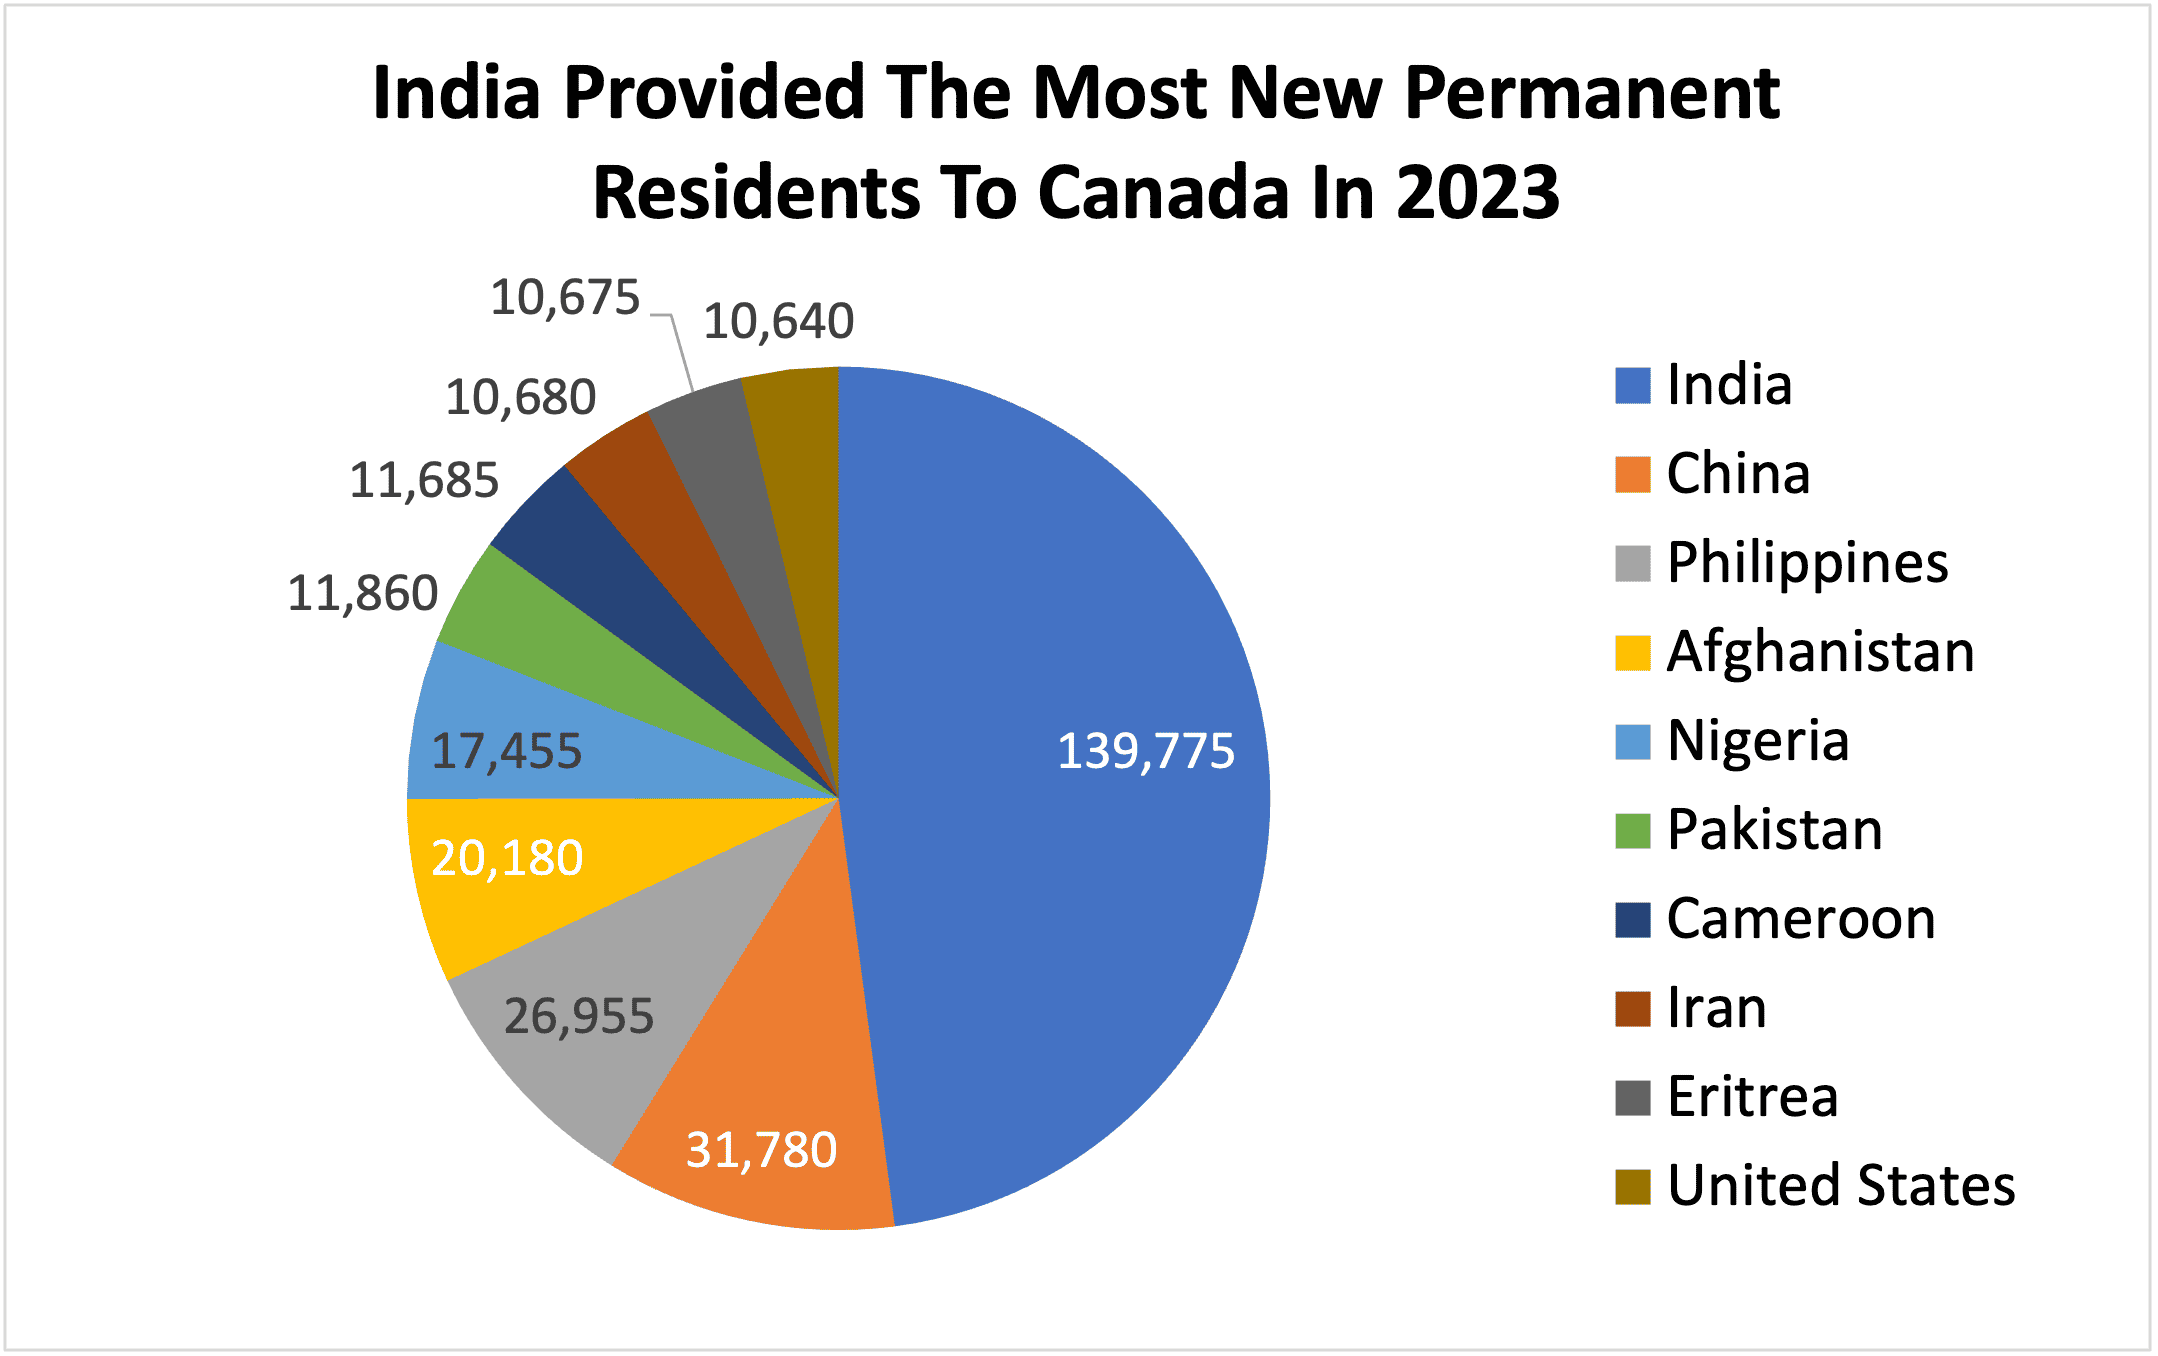 India Provided The Most New Permanent Residents To Canada In 2023